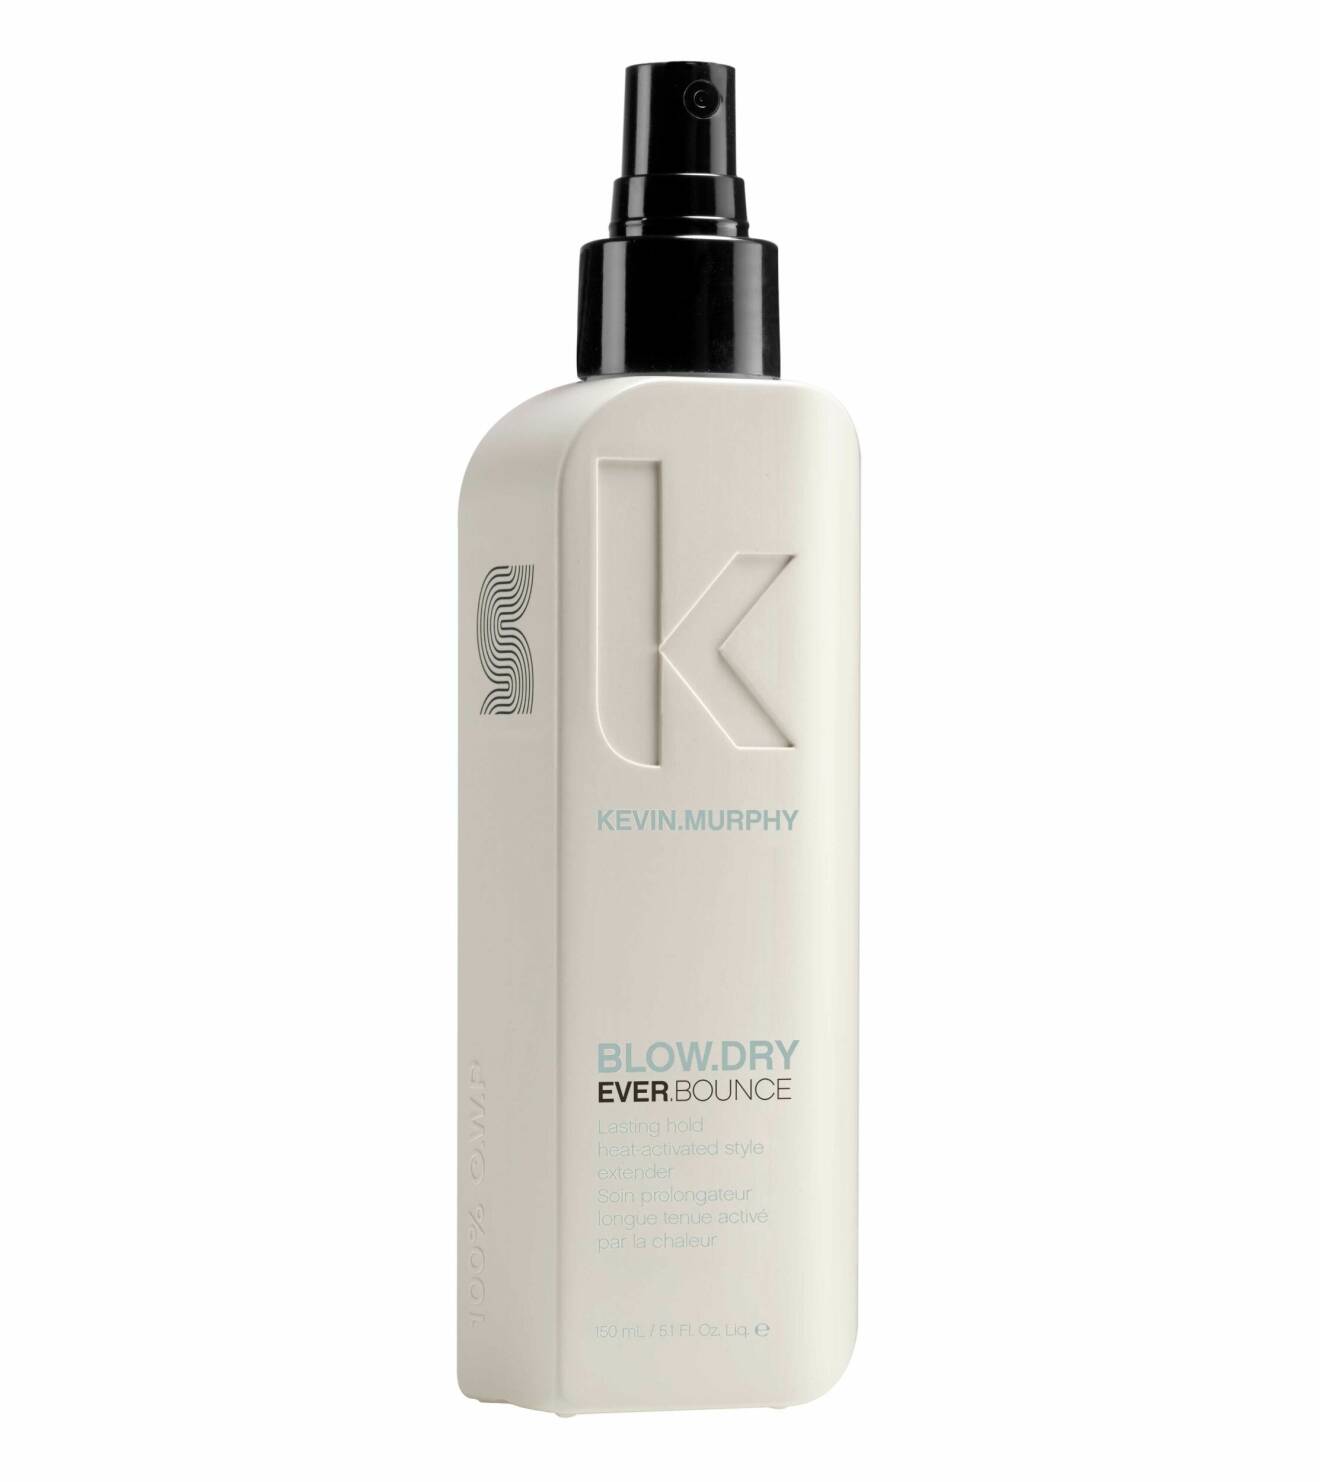 Blow Dry Ever Bounce från Kevin Murphy.